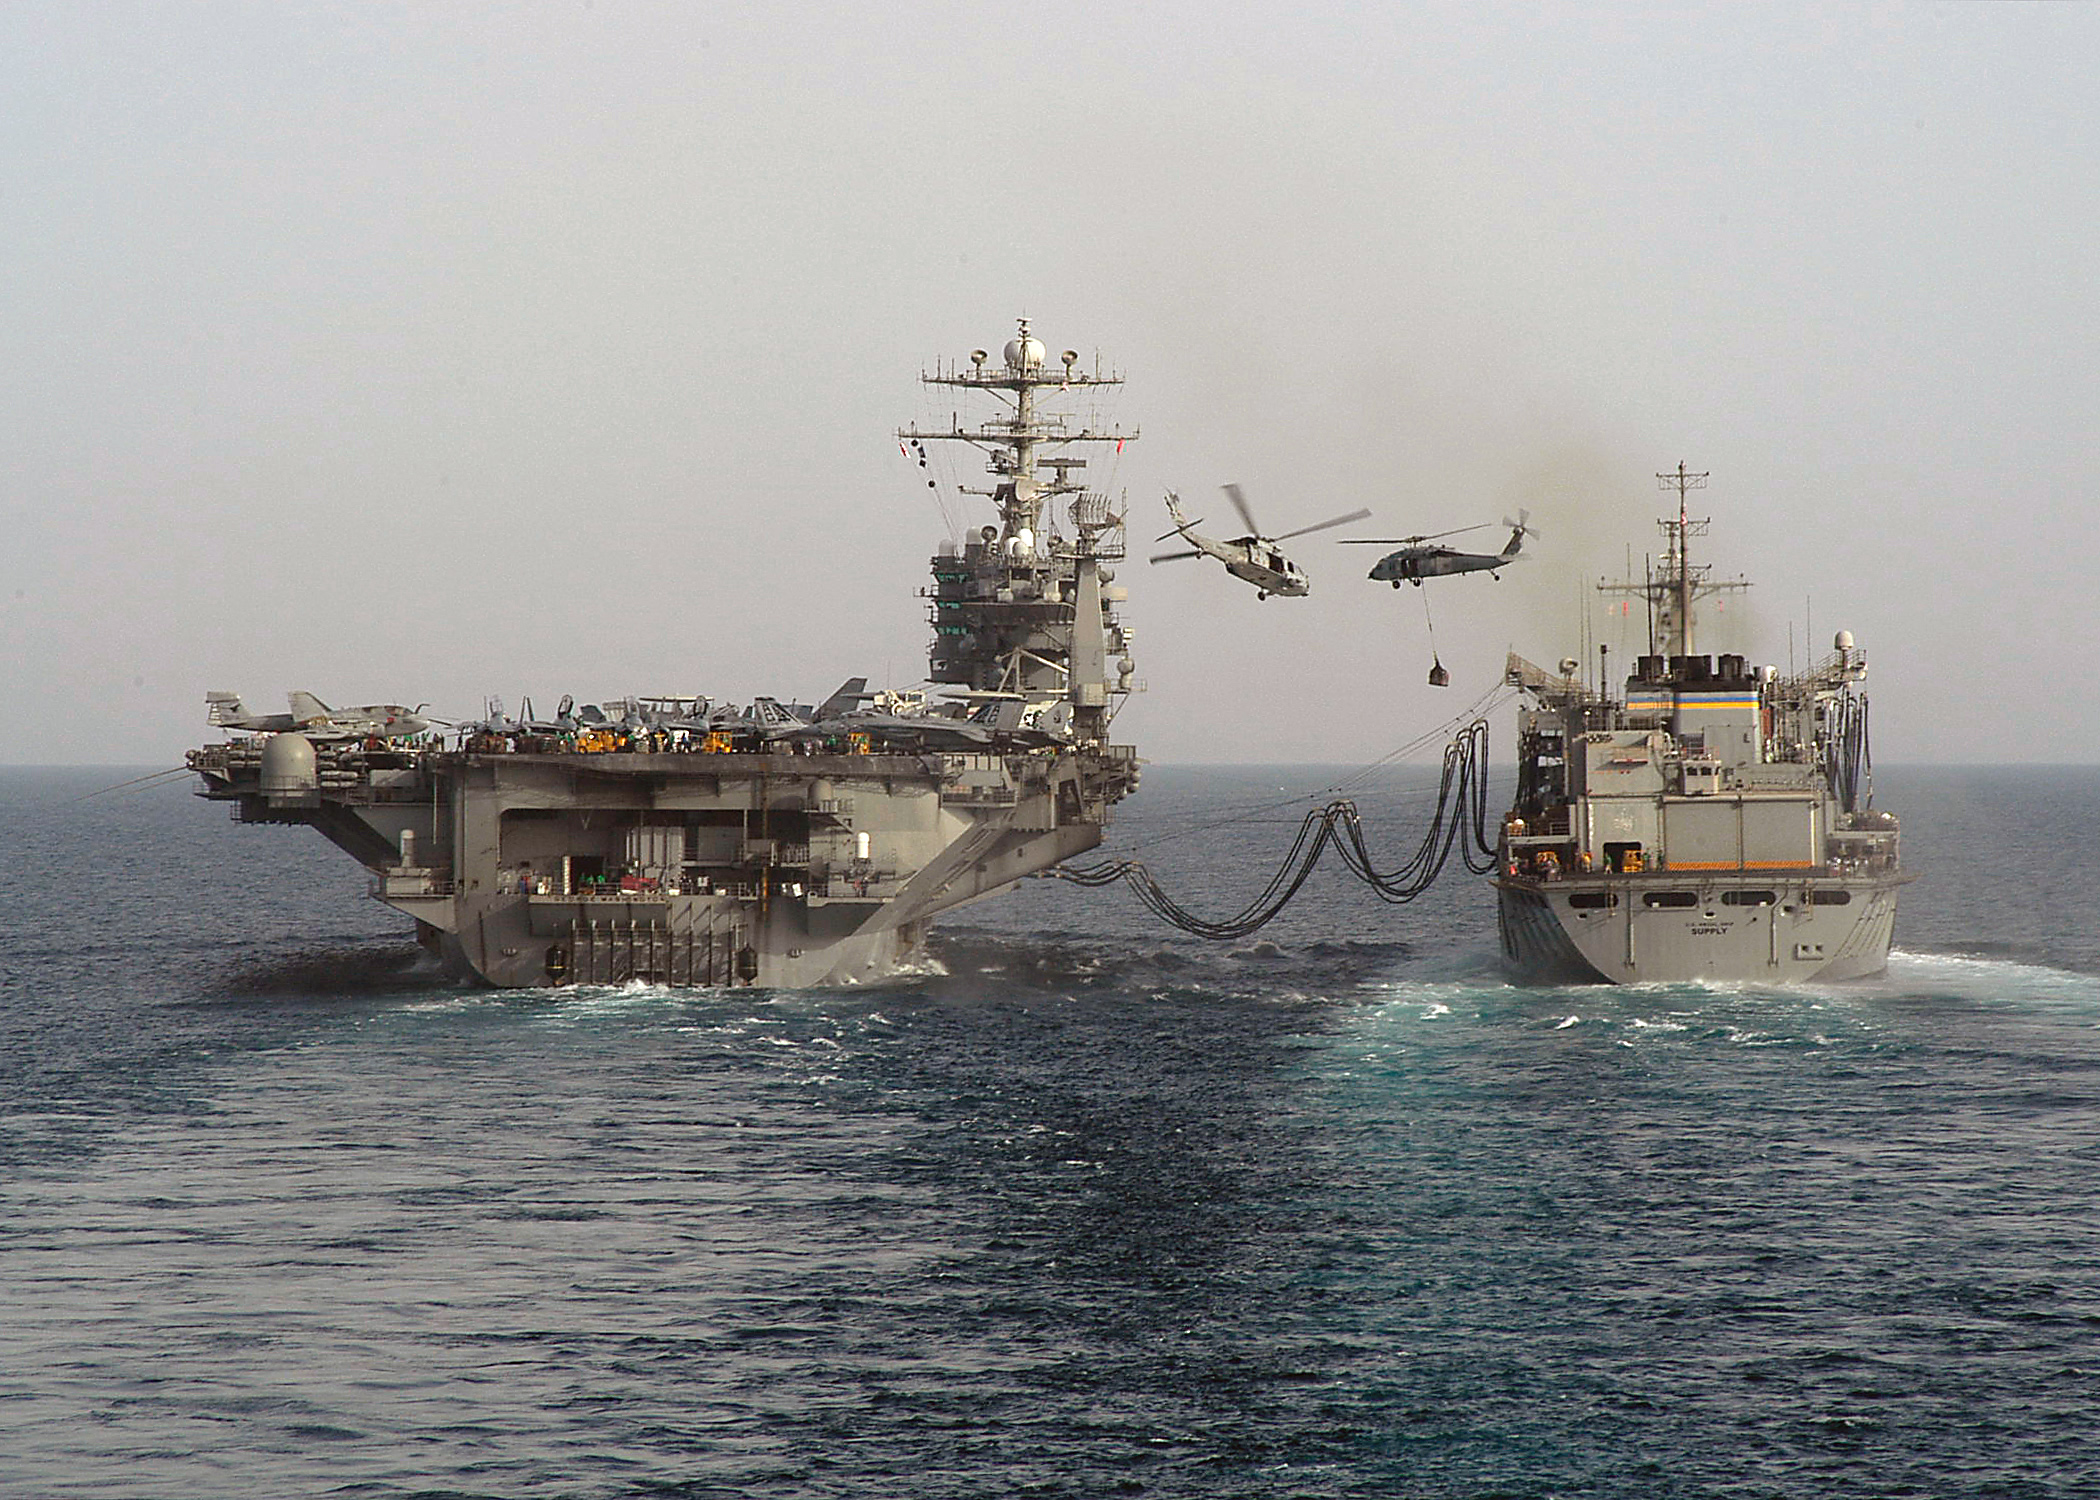 US Navy 040422-N-9630B-010 The Military Sealift Command (MSC) fast combat support ship USNS Supply (T-AOE 6) and USS George Washington (CVN 73) perform a connected replenishment at sea (RAS)